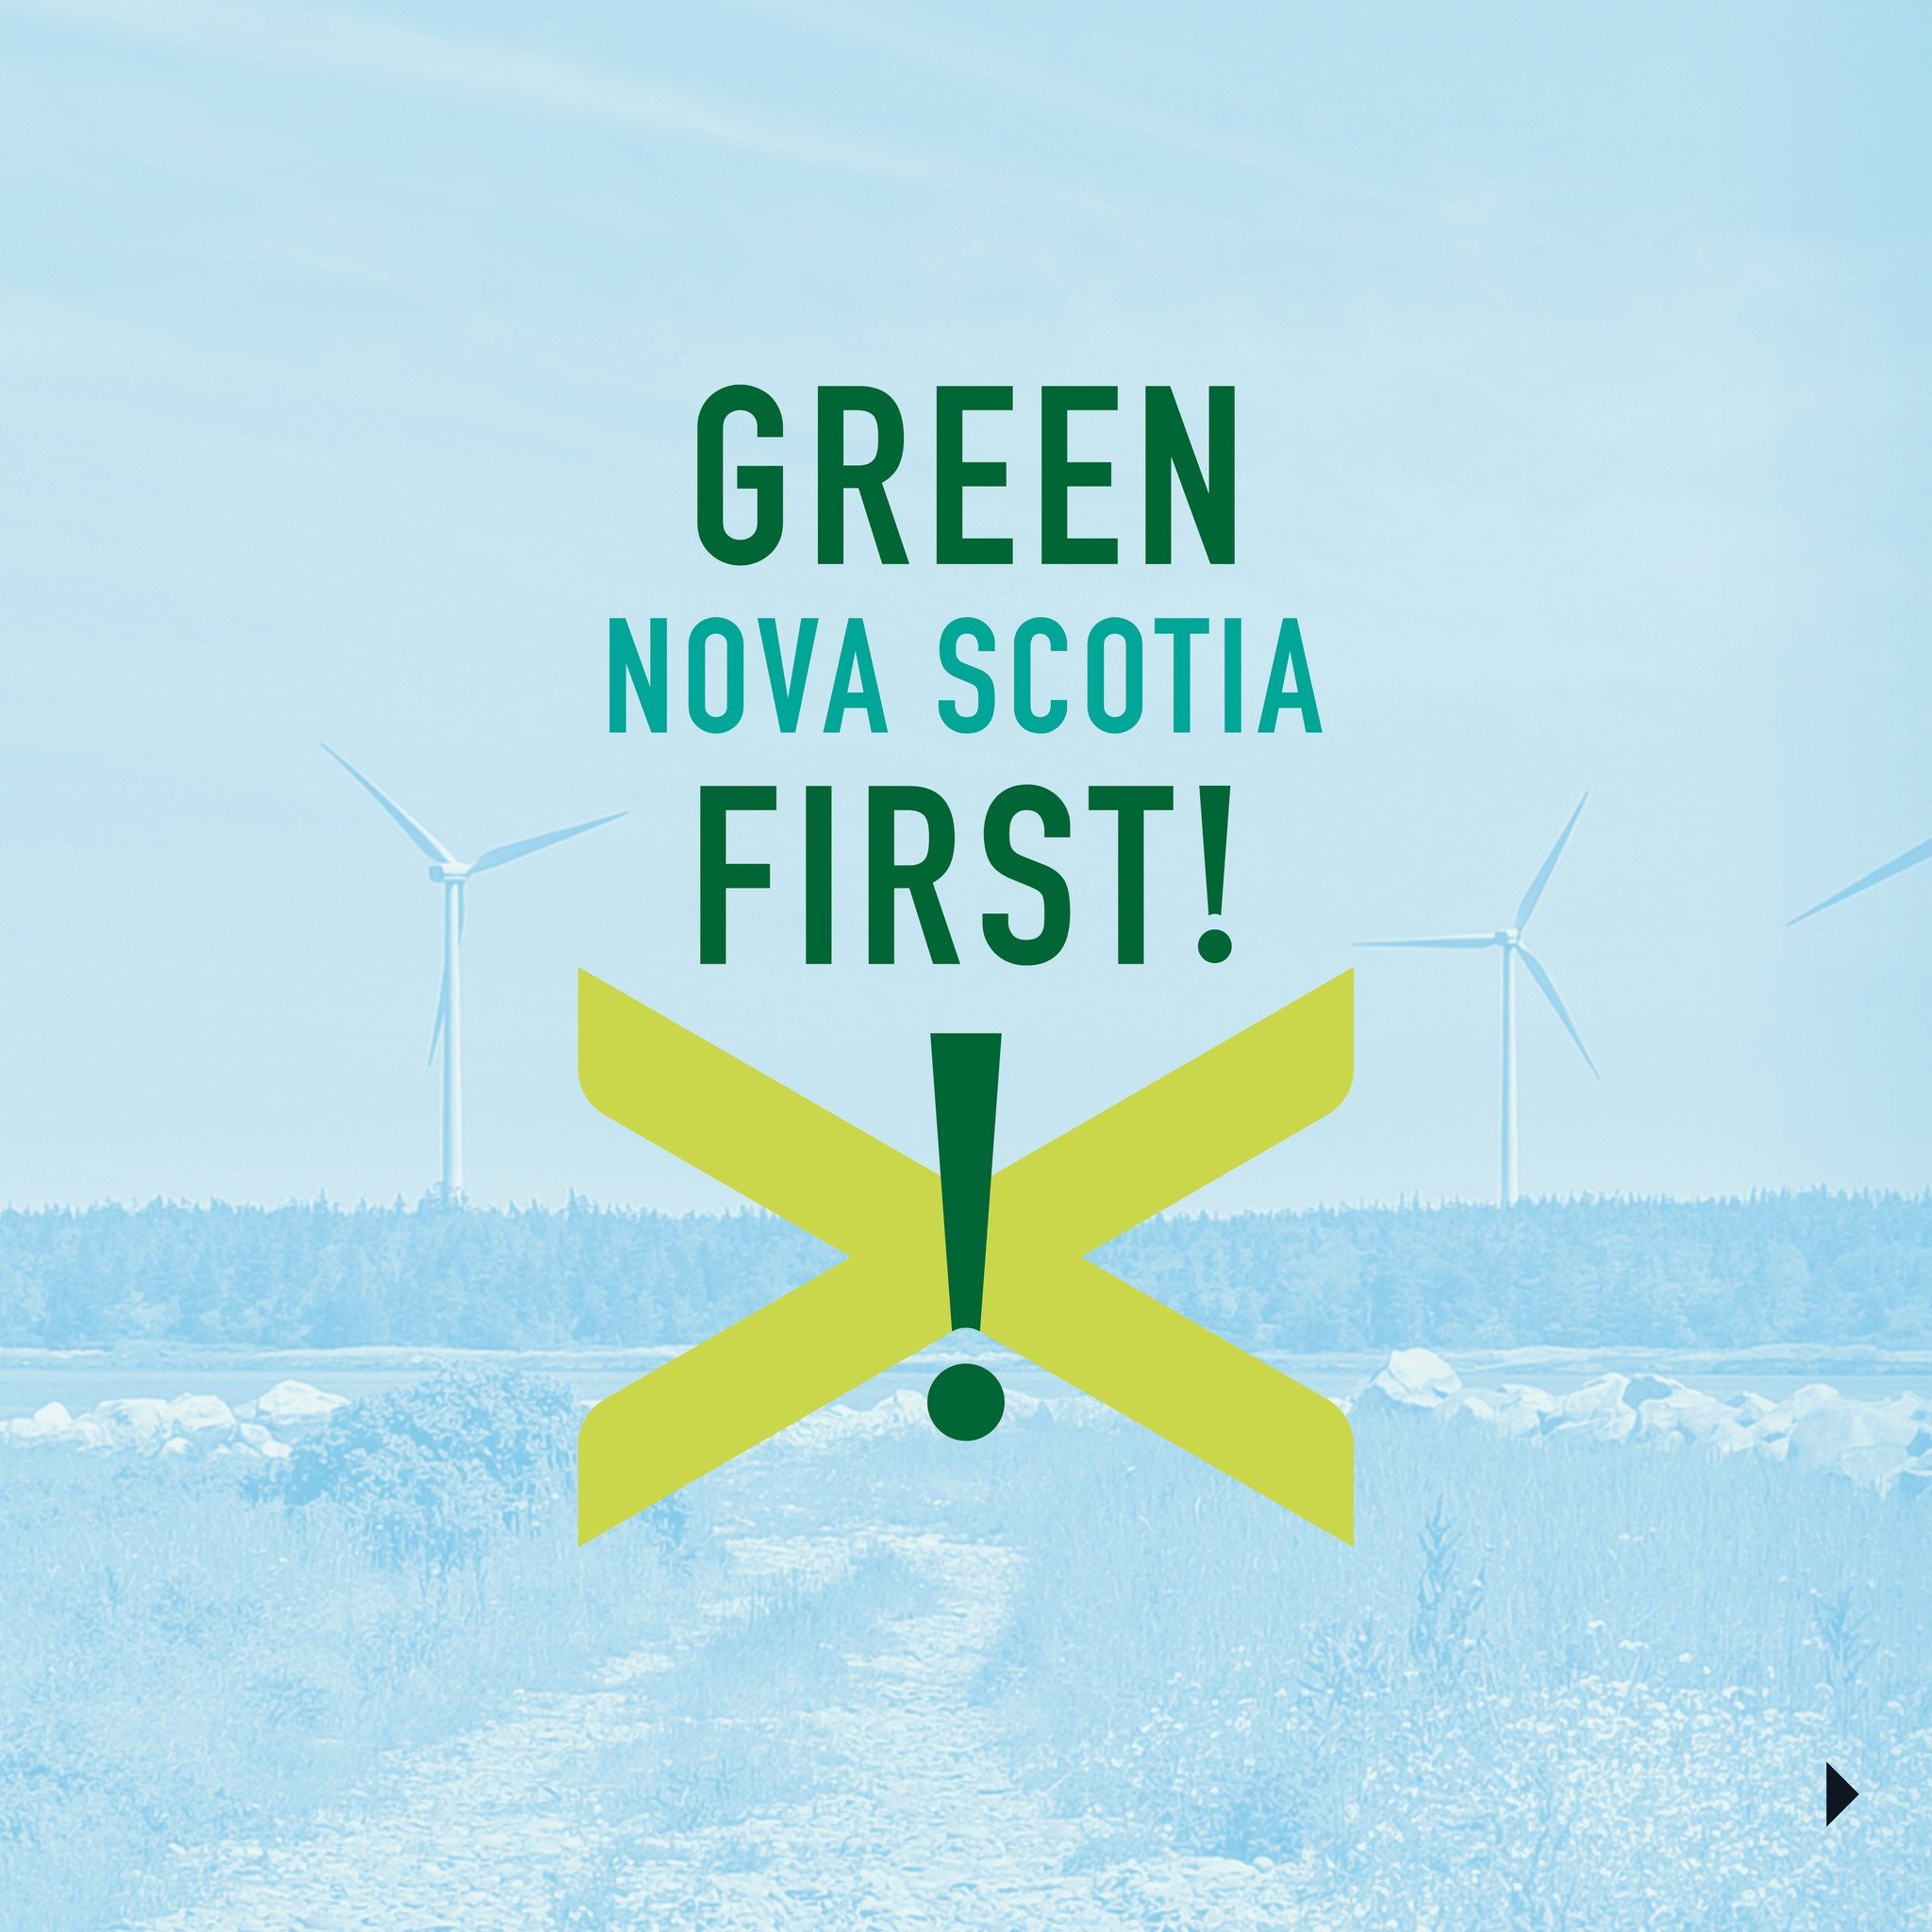 Green Nova Scotia First believes our province should first focus on decarbonizing the power grid before engaging with multination companies that propose installing power turbines to export&mdash;purportedly &ldquo;green&rdquo;&mdash;hydrogen or ammon